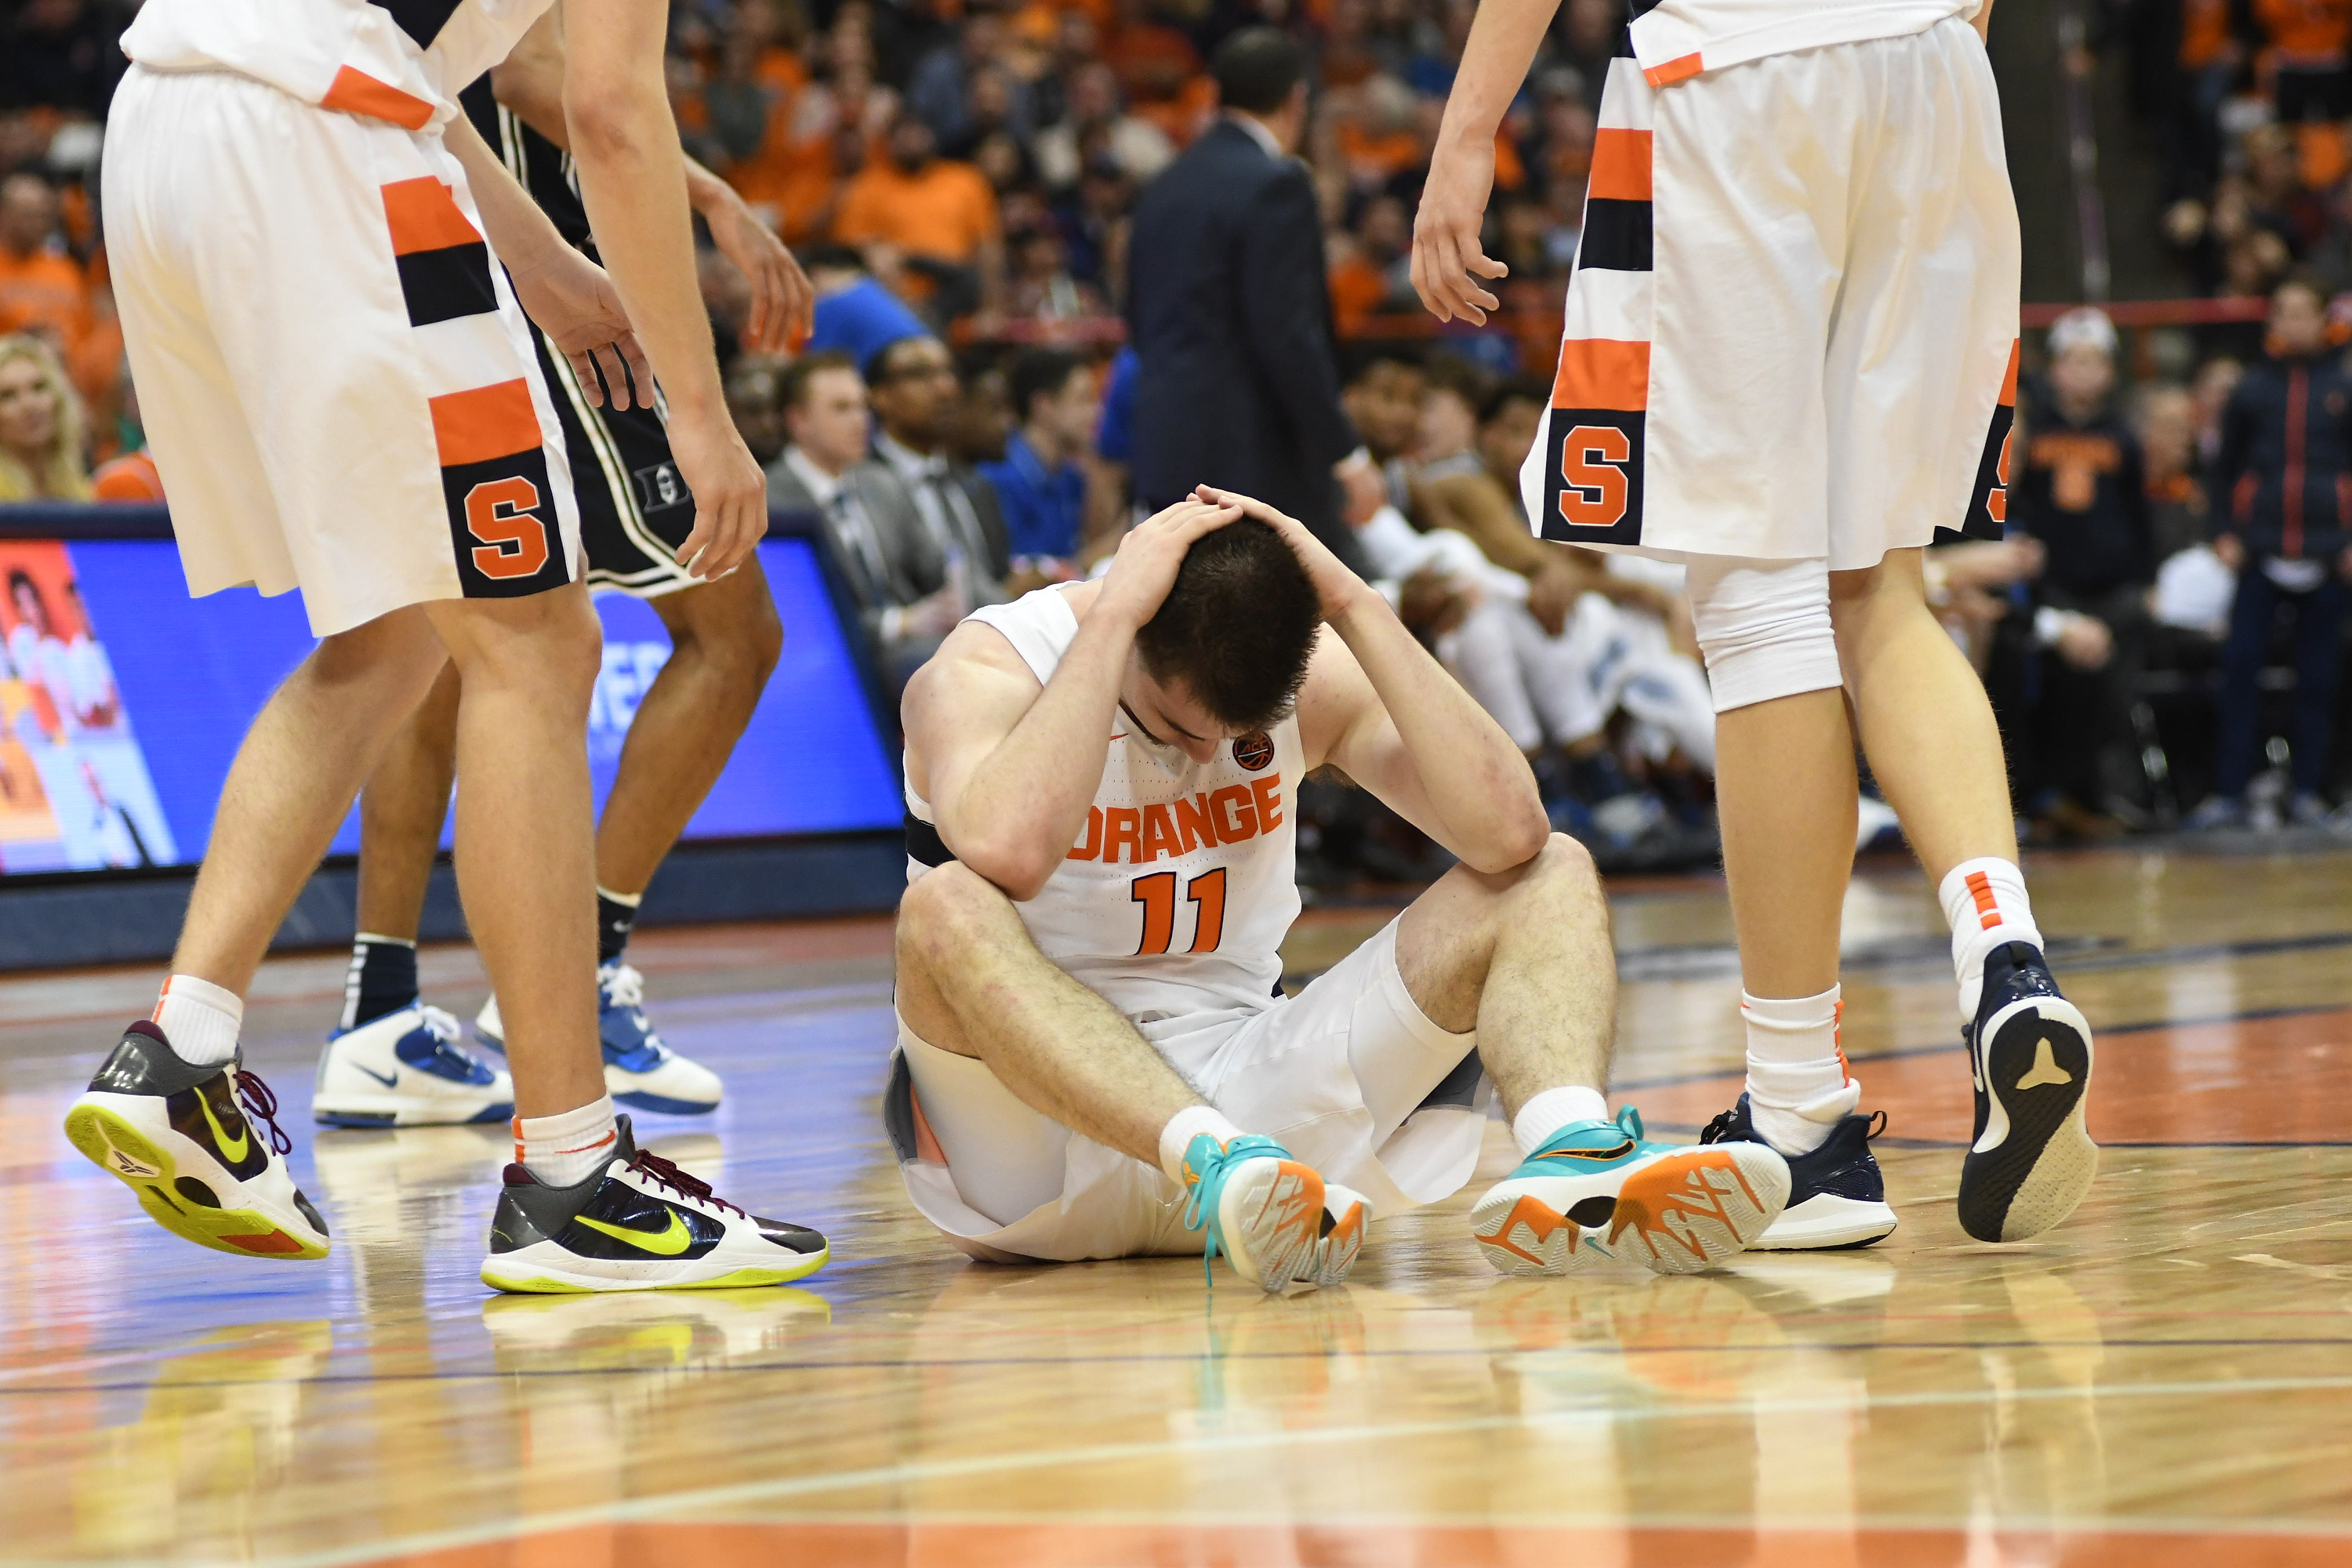 Joseph Girard III reacts during the second half of the game vs Duke at the Carrier Dome on Feb. 1, 2020.